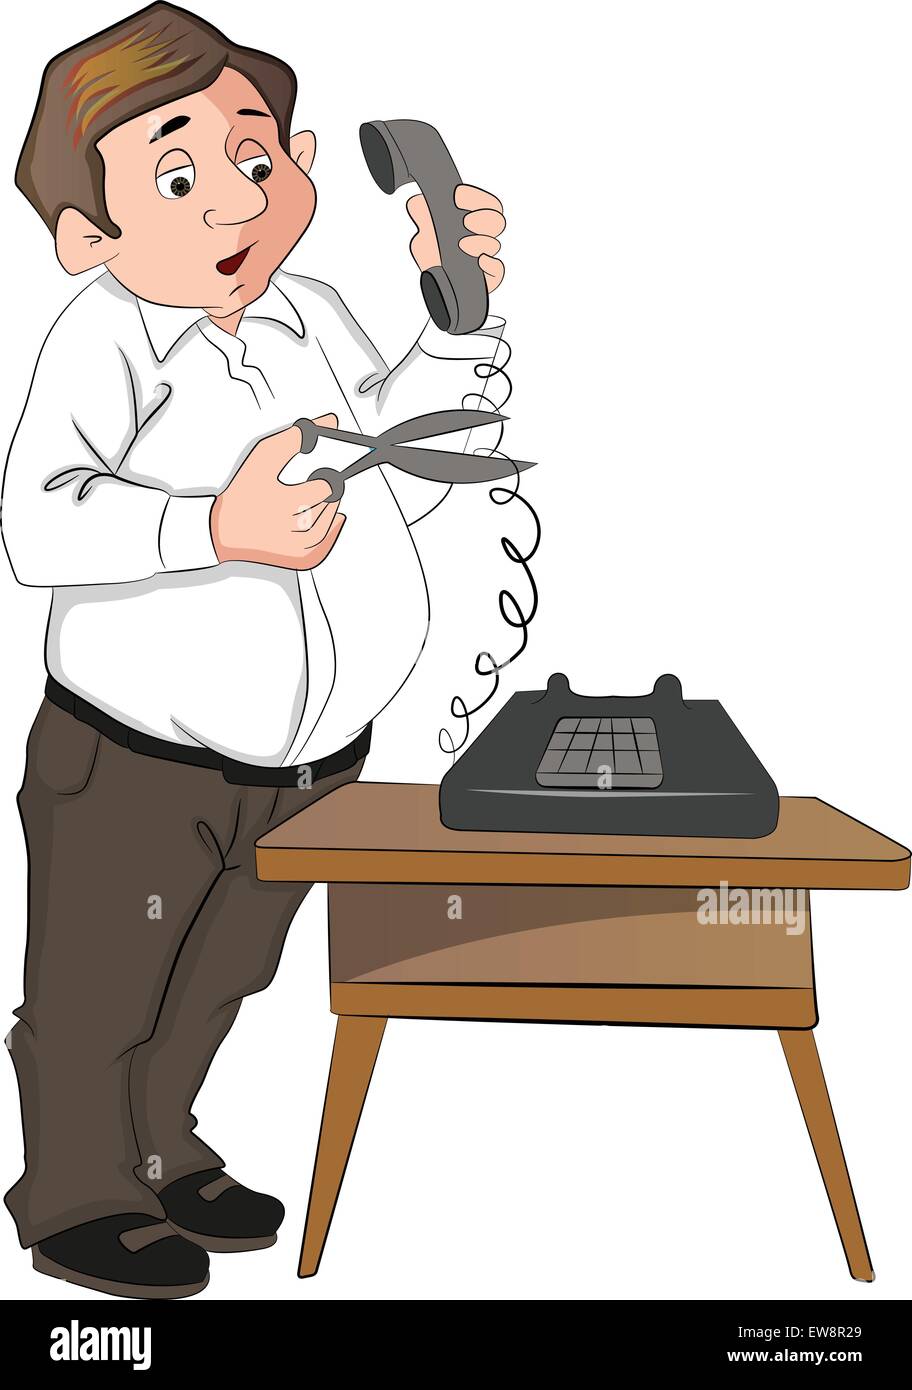 Vector illustration of a man cutting telephone cord with scissors. Stock Vector